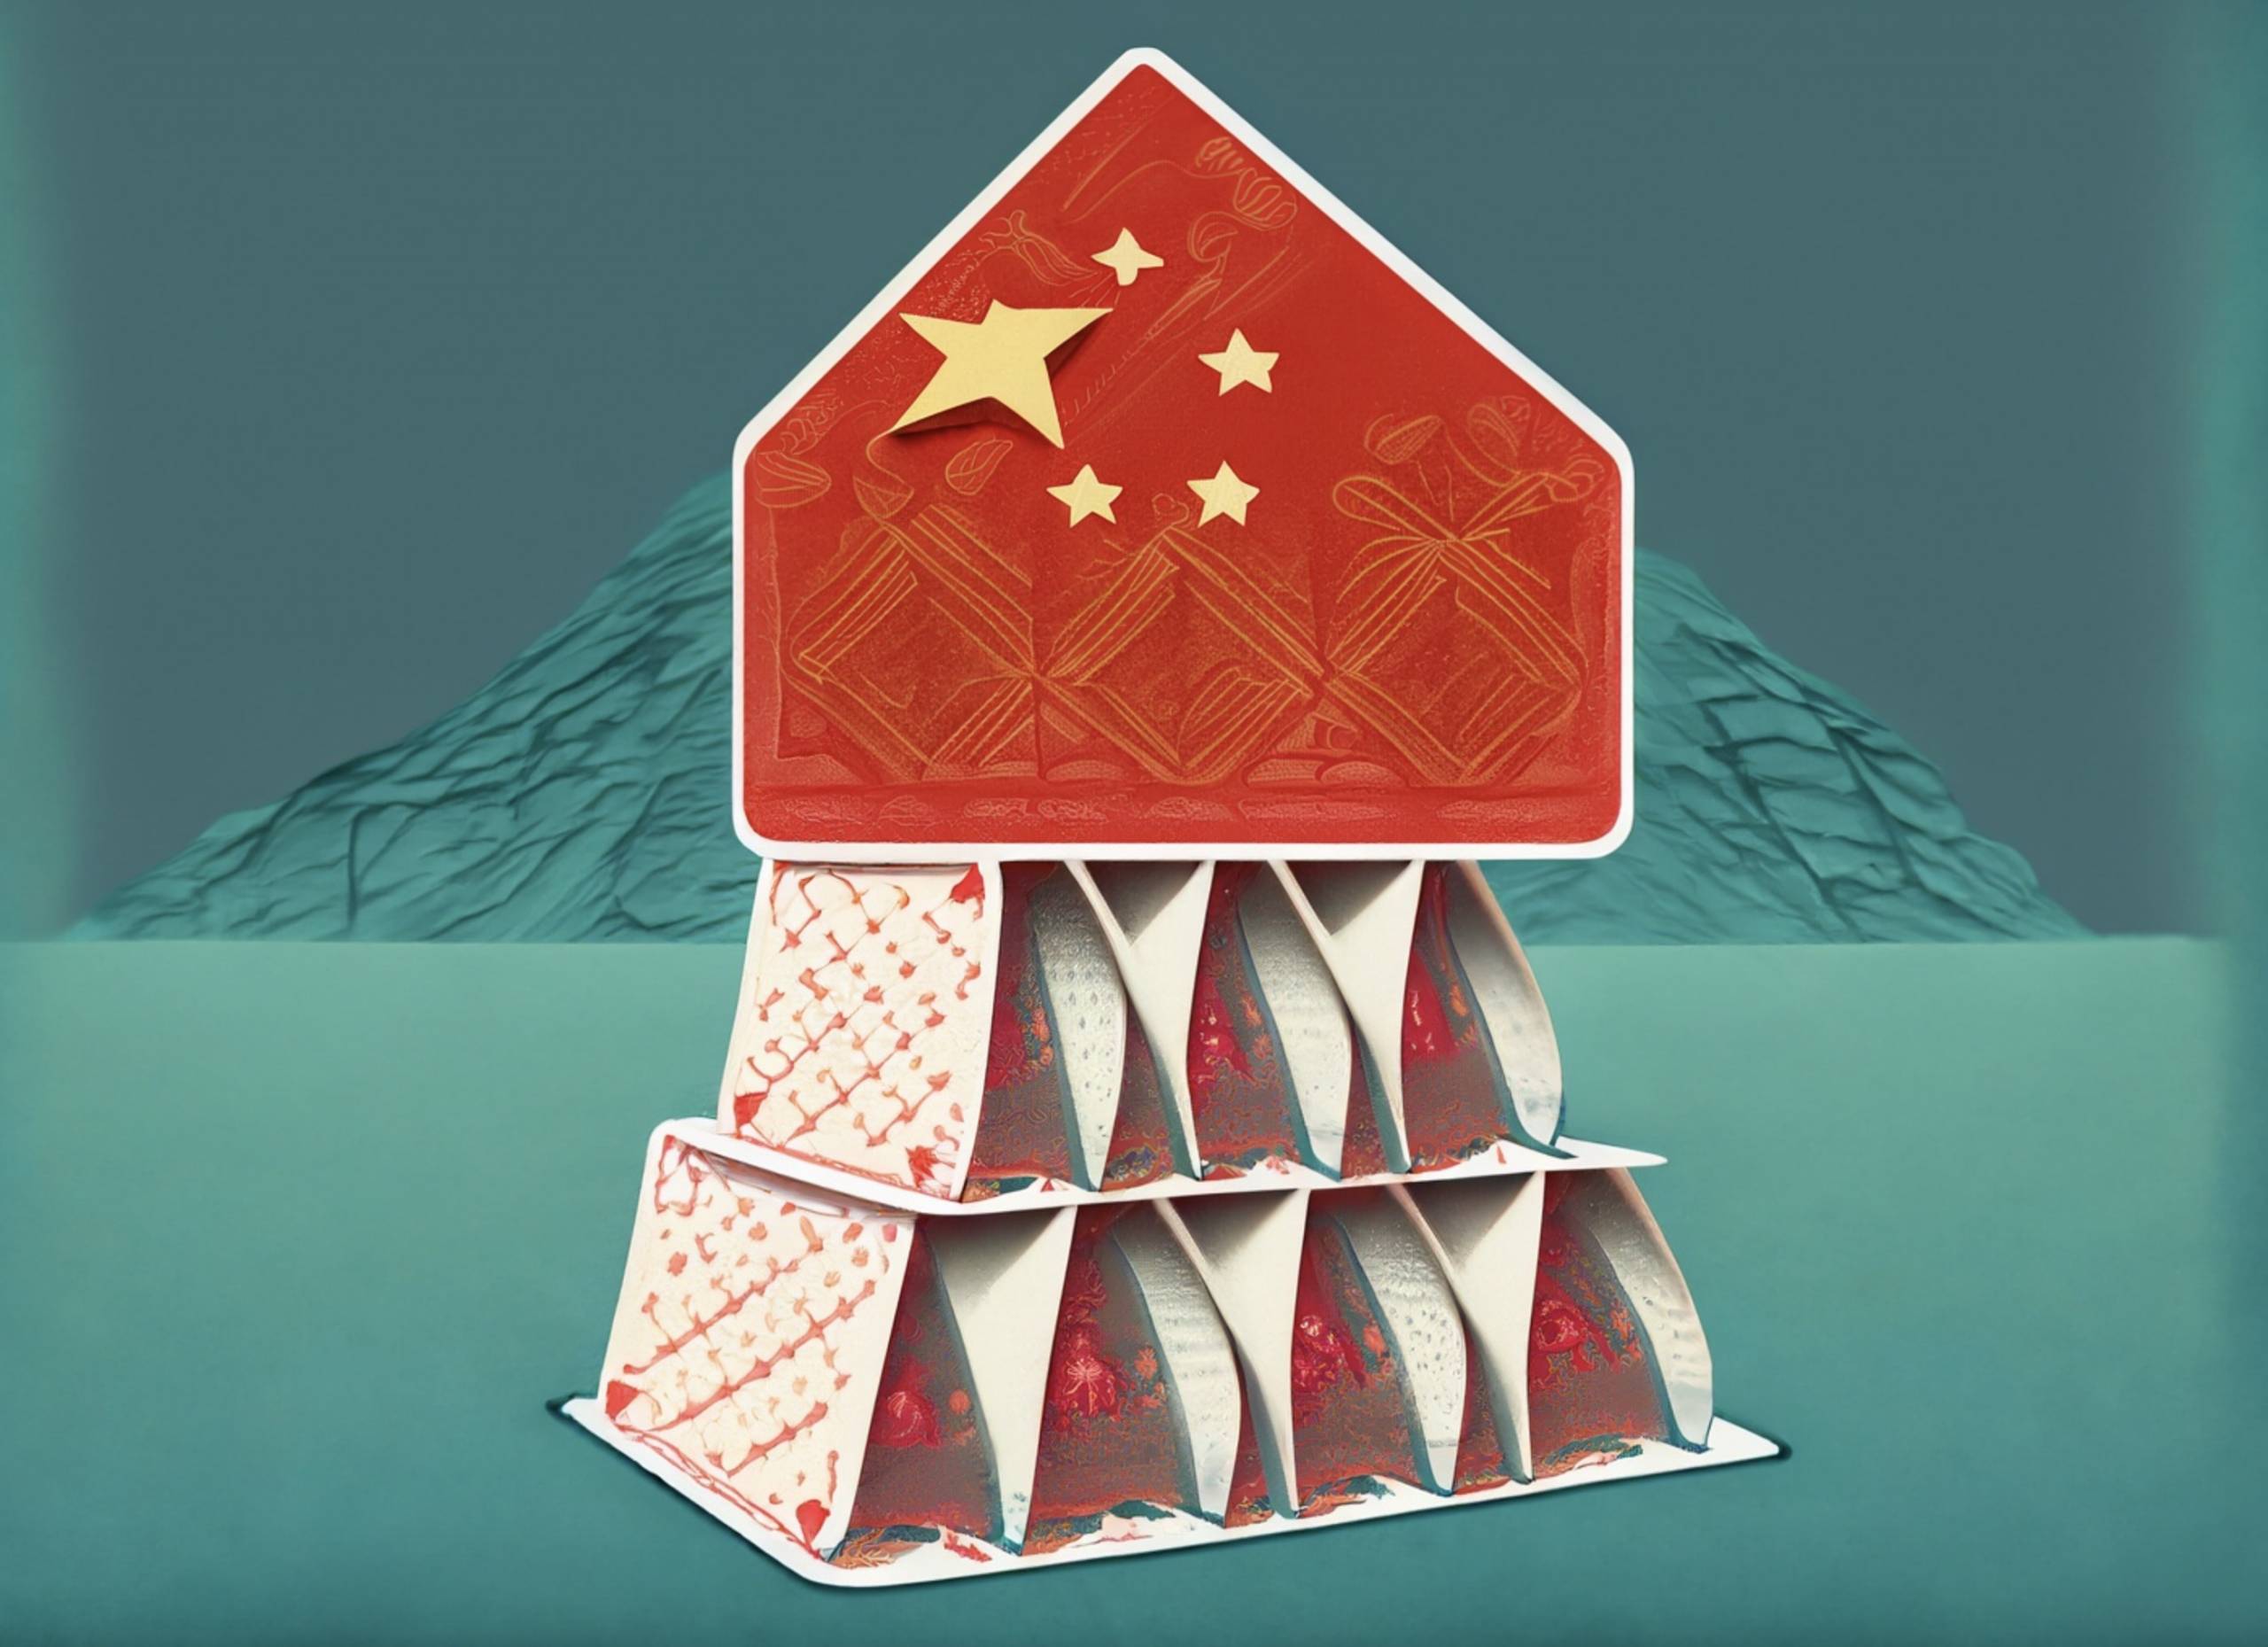 China's economy: House of Cards waiting to happen